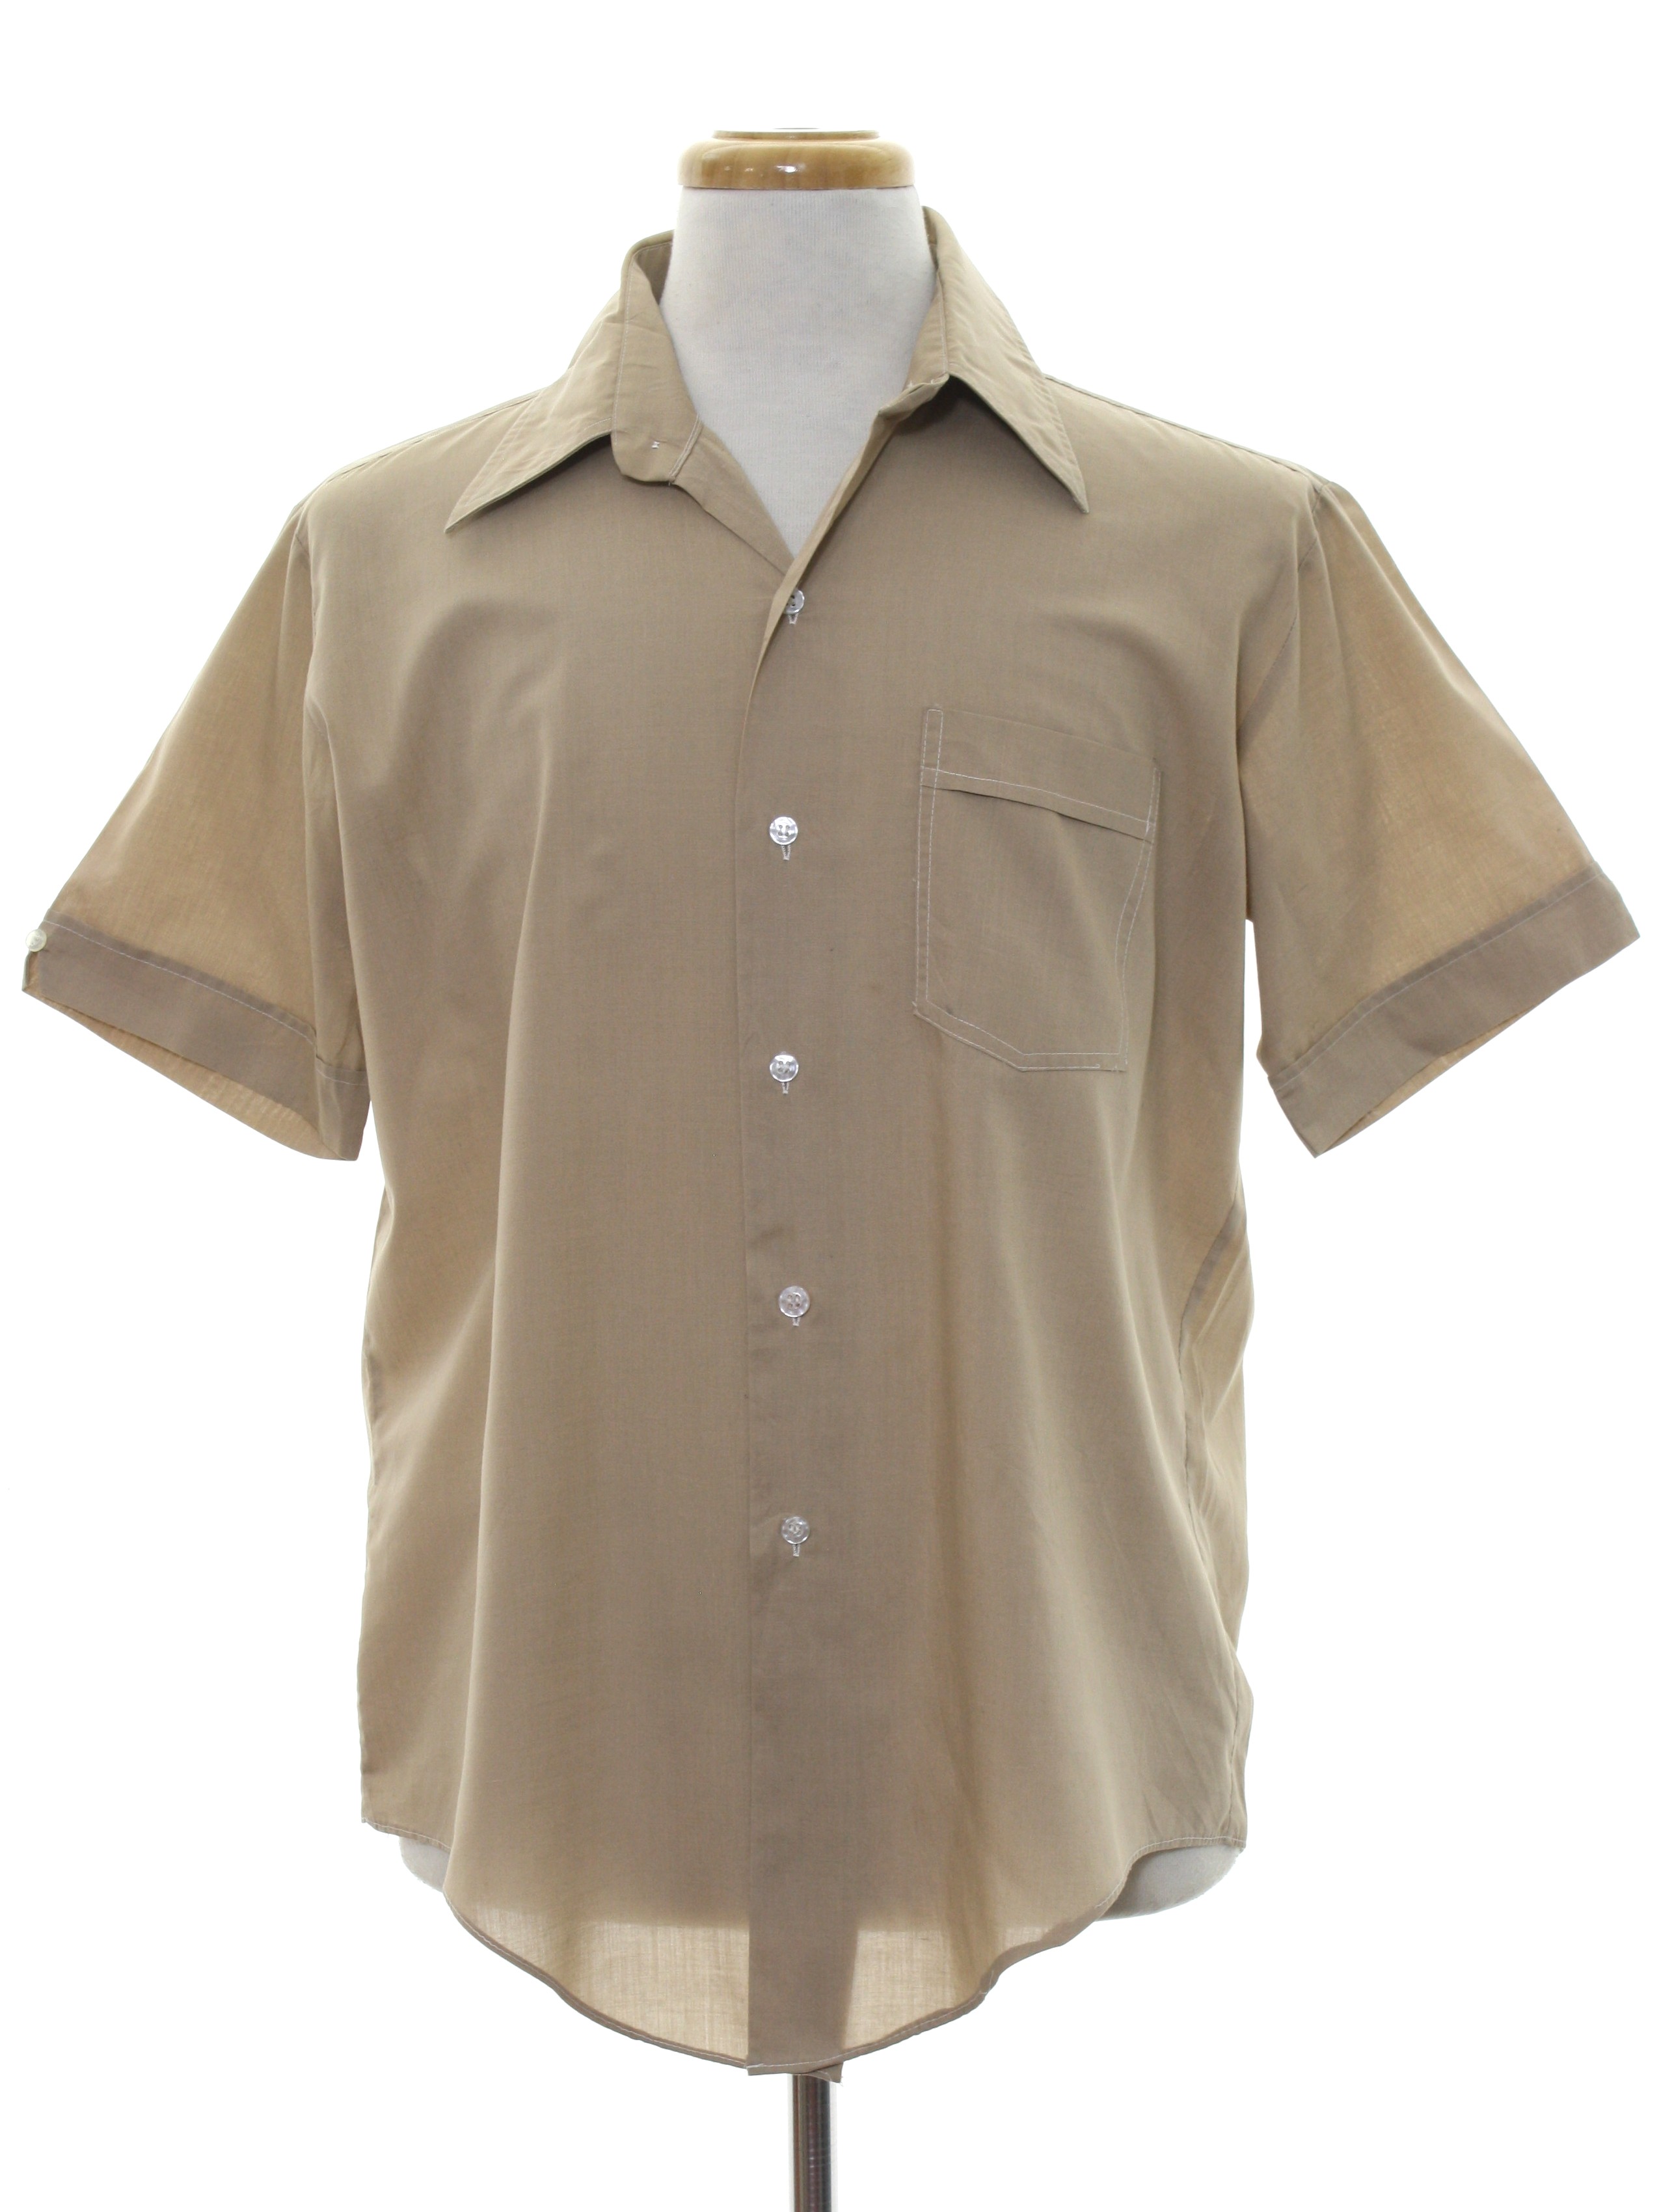 Retro 1970's Shirt (Cougar) : 70s -Cougar- Mens taupe polyester cotton ...